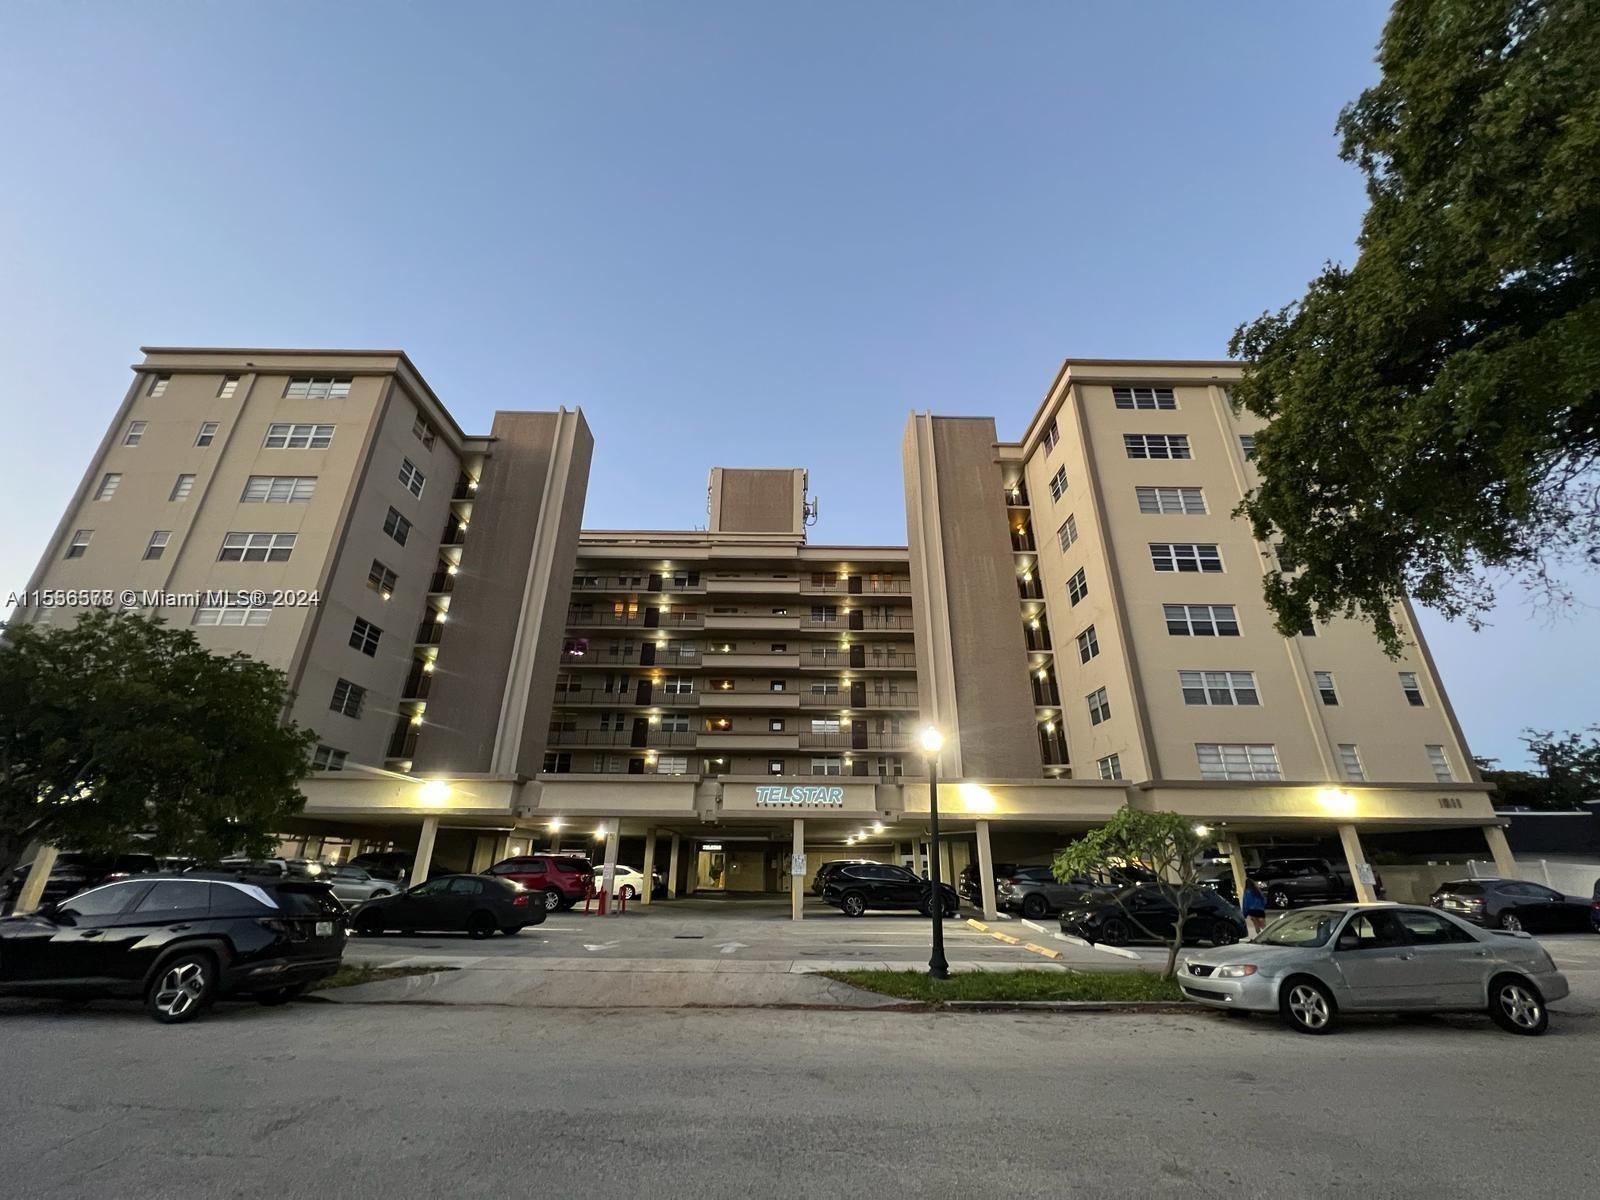 Photo of 1811 Jefferson St #702 in Hollywood, FL